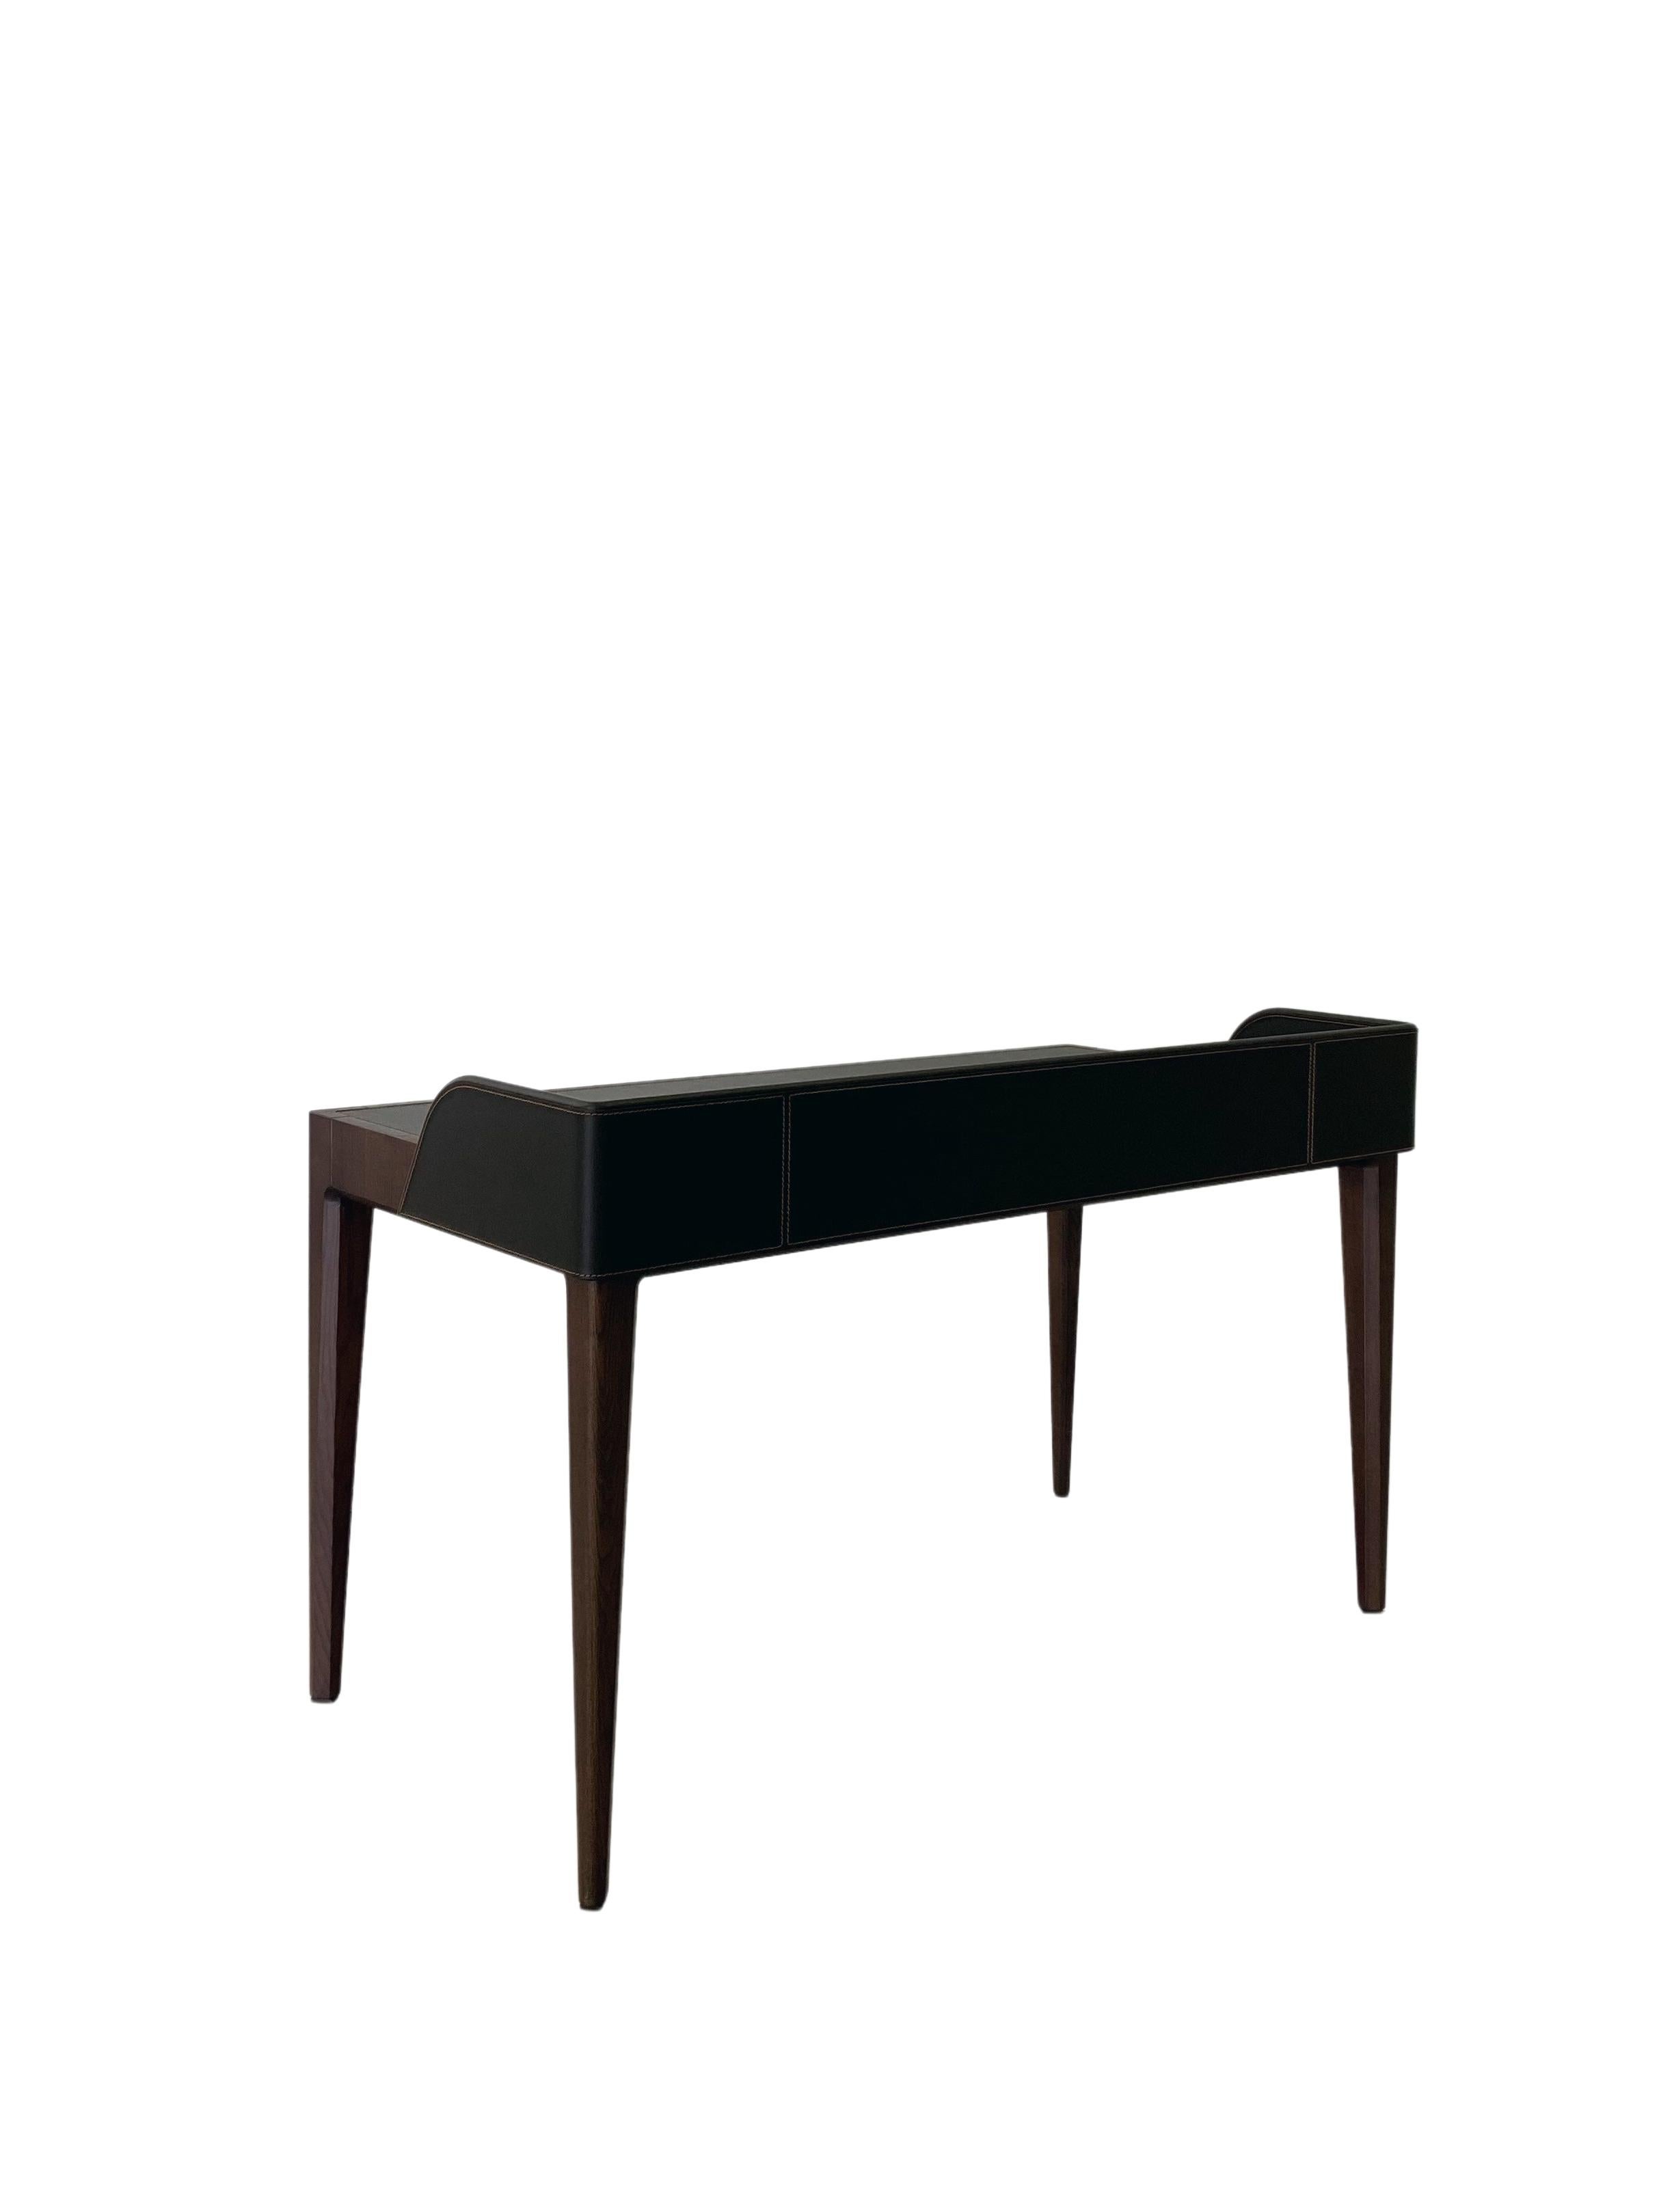 Contemporary Desk Made of Ashwood with Leather Flapping Top, by Morelato 6